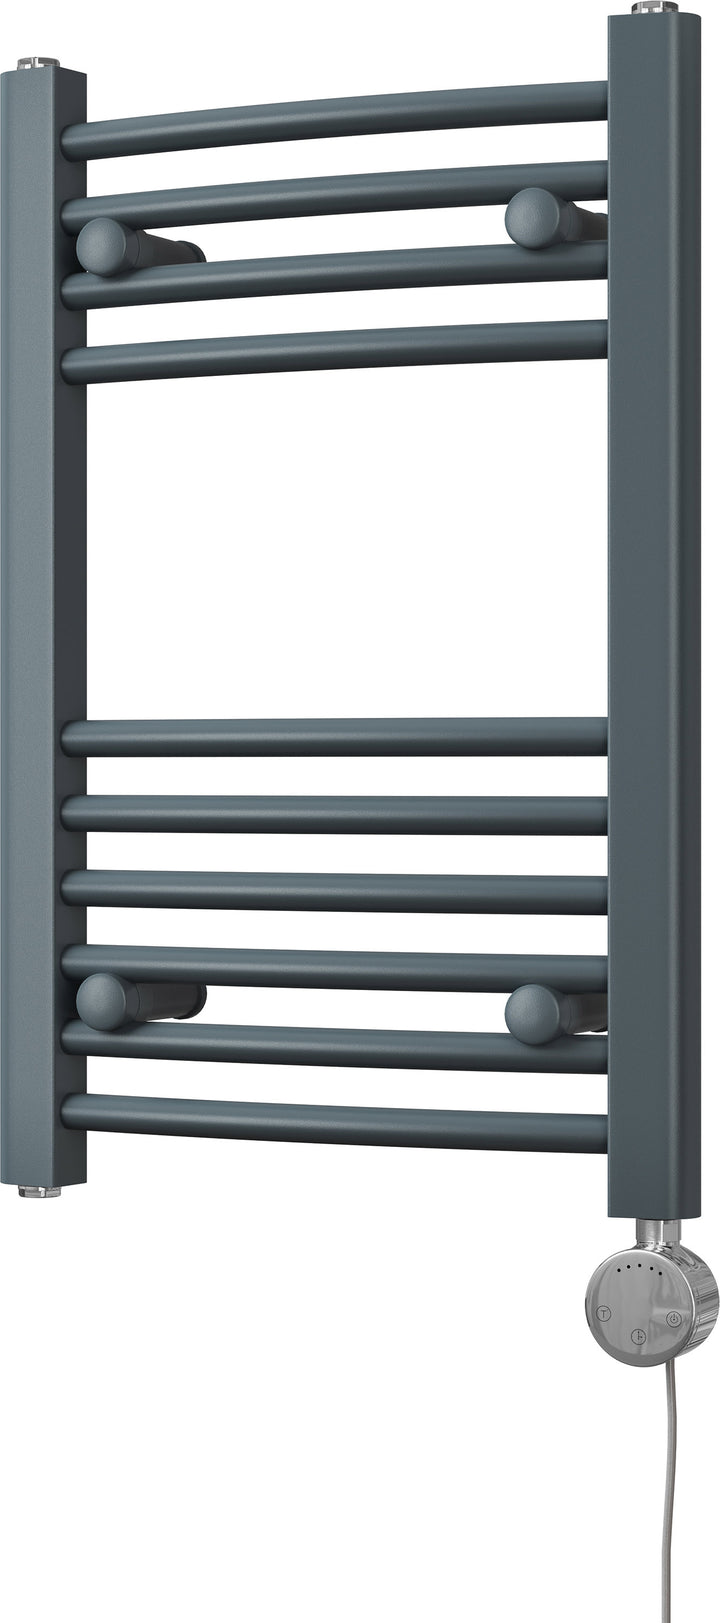 Zennor - Anthracite Electric Towel Rail H600mm x W400mm Curved 300w Thermostatic